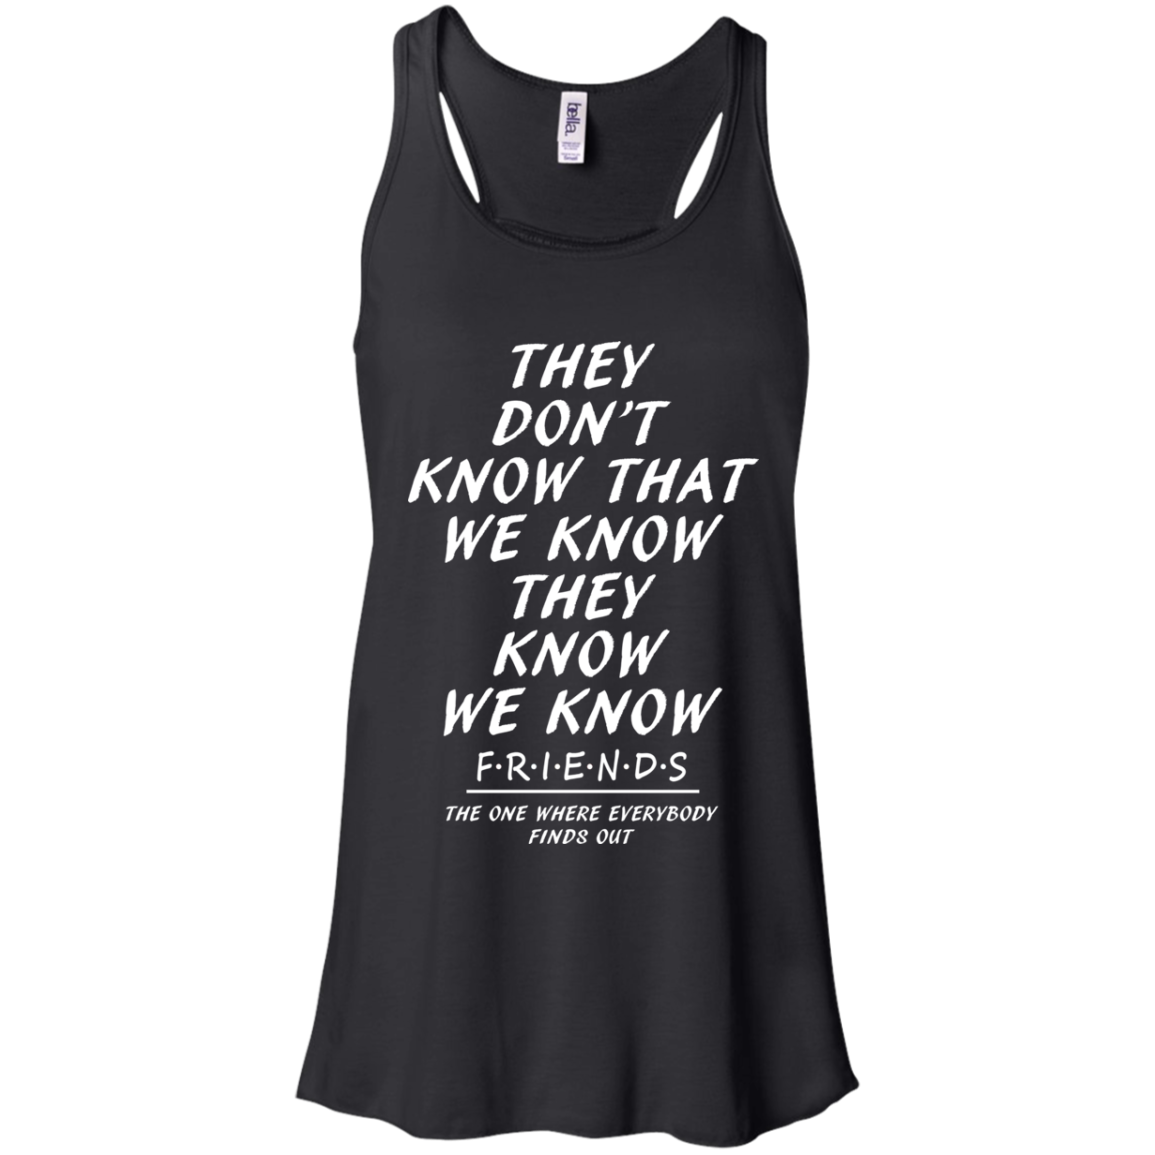 They Don’t Know That We Know We Know shirt